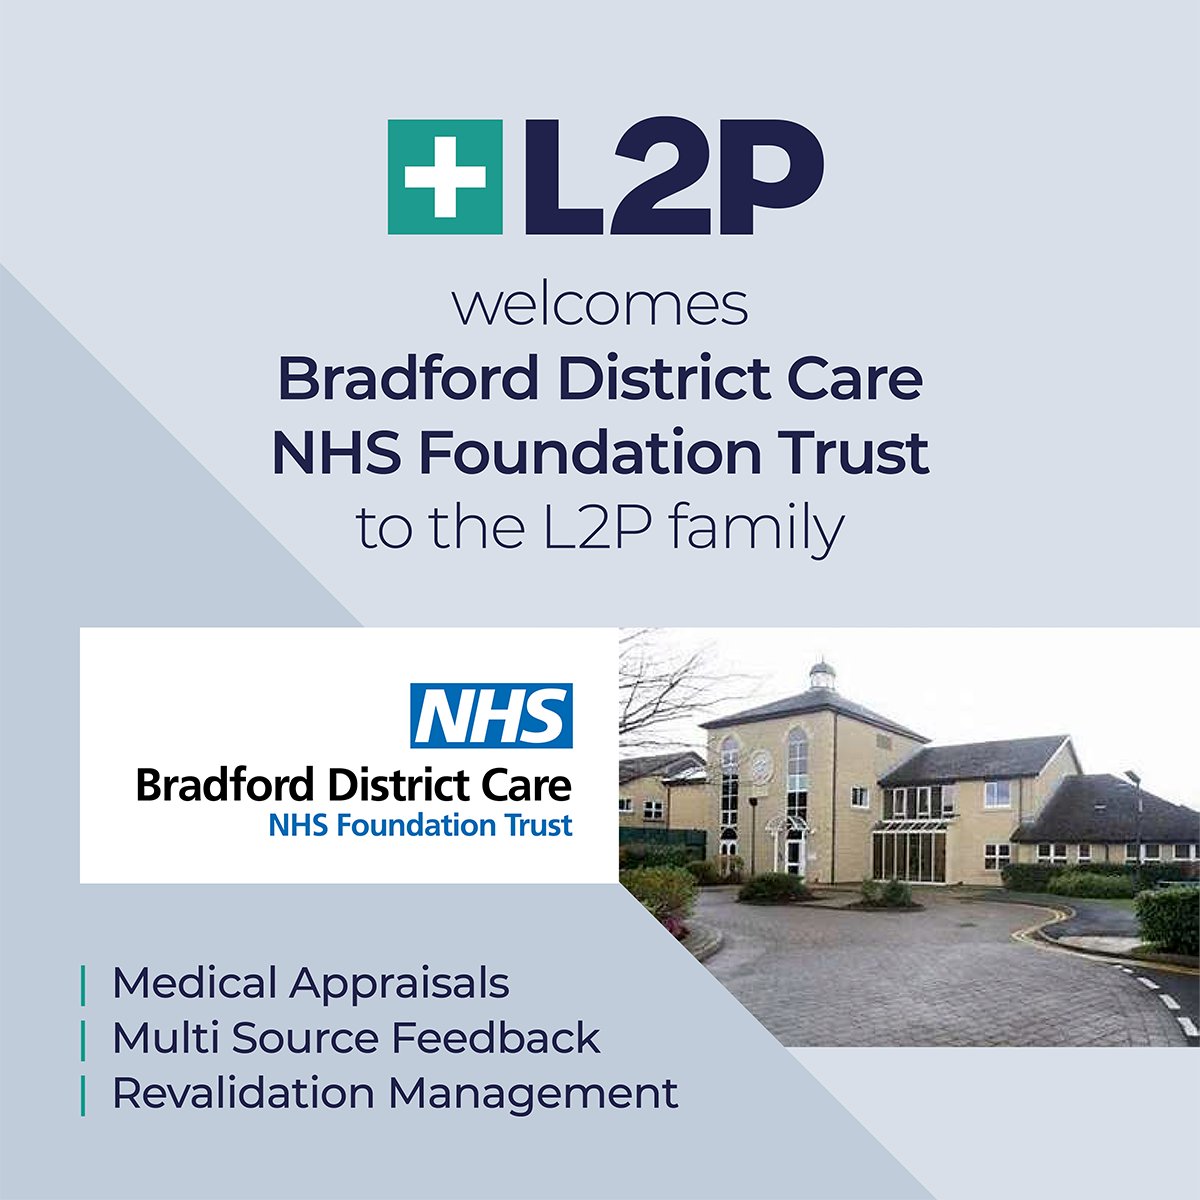 We are delighted to welcome Bradford  District Care NHS Foundation Trust to the L2P Enterprise Ltd family for Revalidation Management, Medical Appraisals, and Multi-Source Feedback.
#nhs #l2p #revalidation #workforcemanagement #appraisals #multisourcefeedback